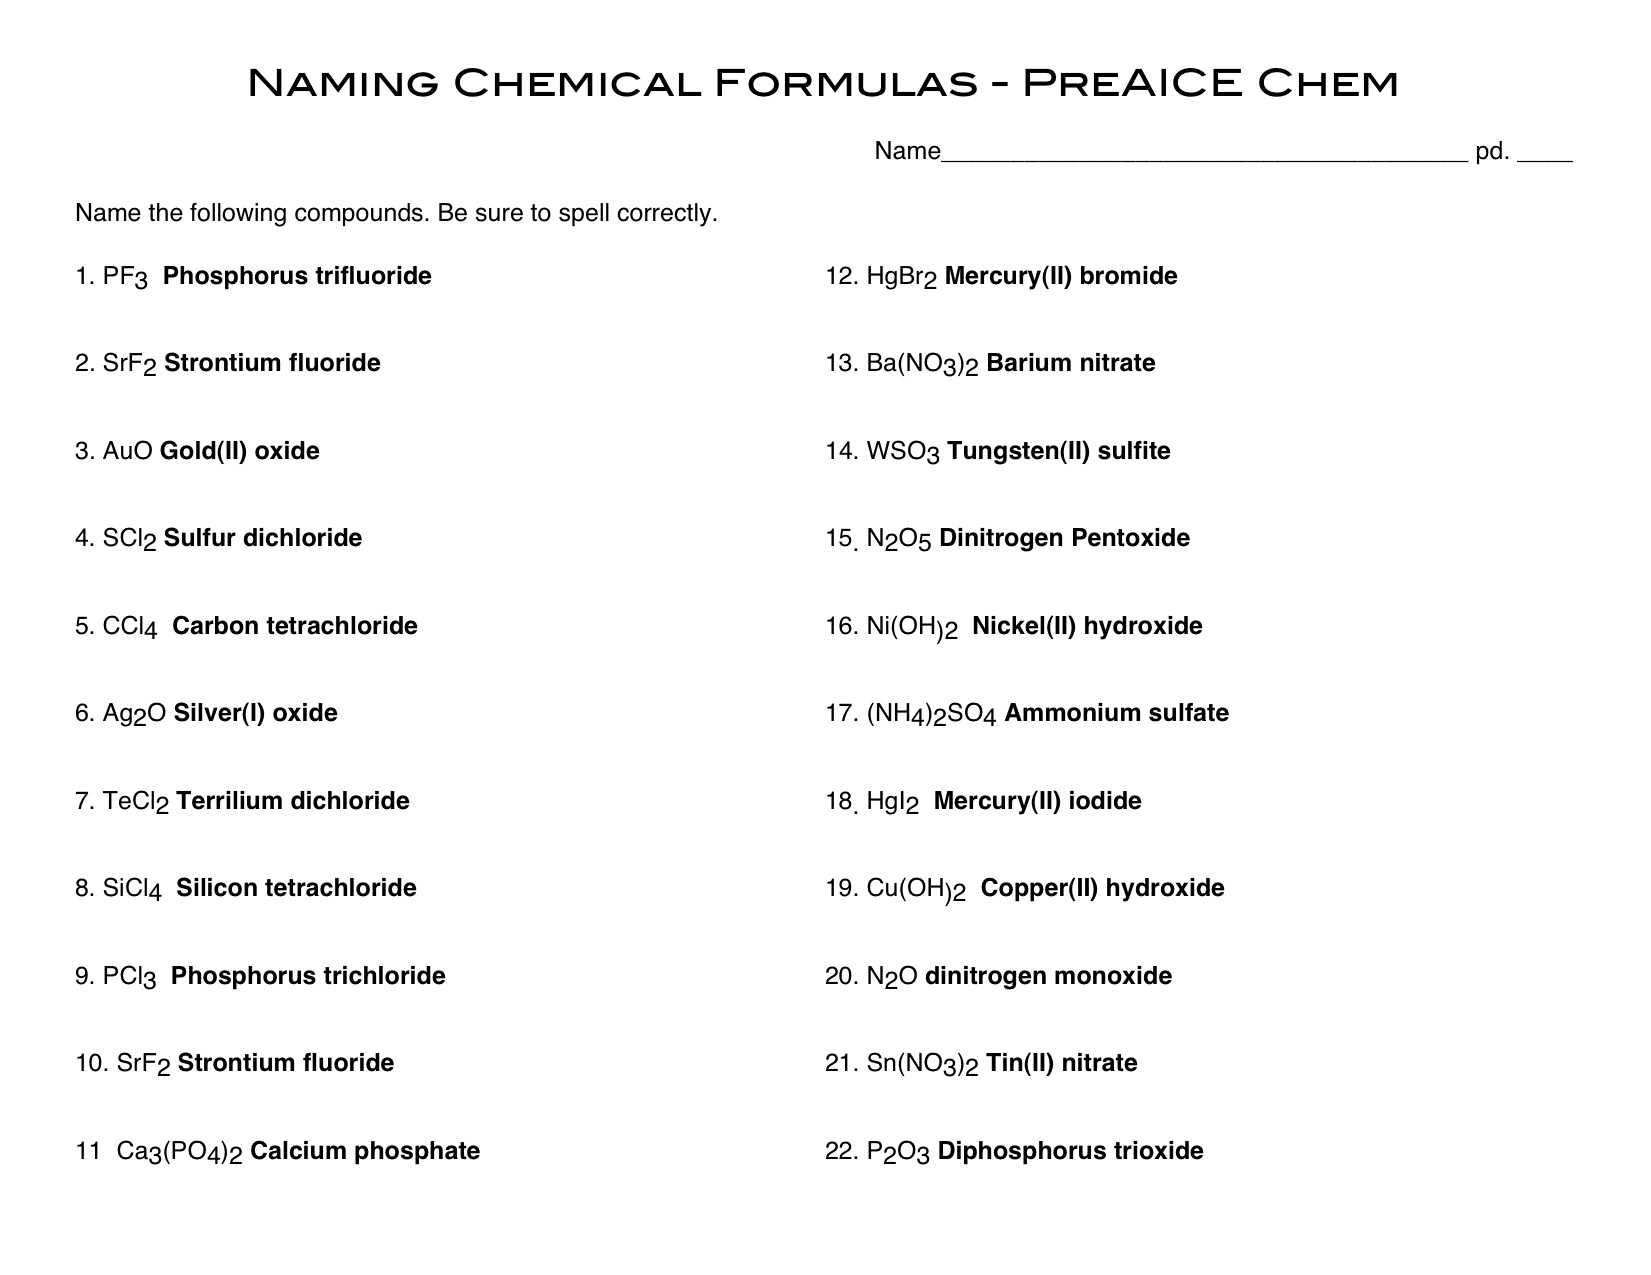 Chemical Bonds Ionic Bonds Worksheet Along with Chemical Bonds Ionic Bonds Worksheet Answers Image Collections